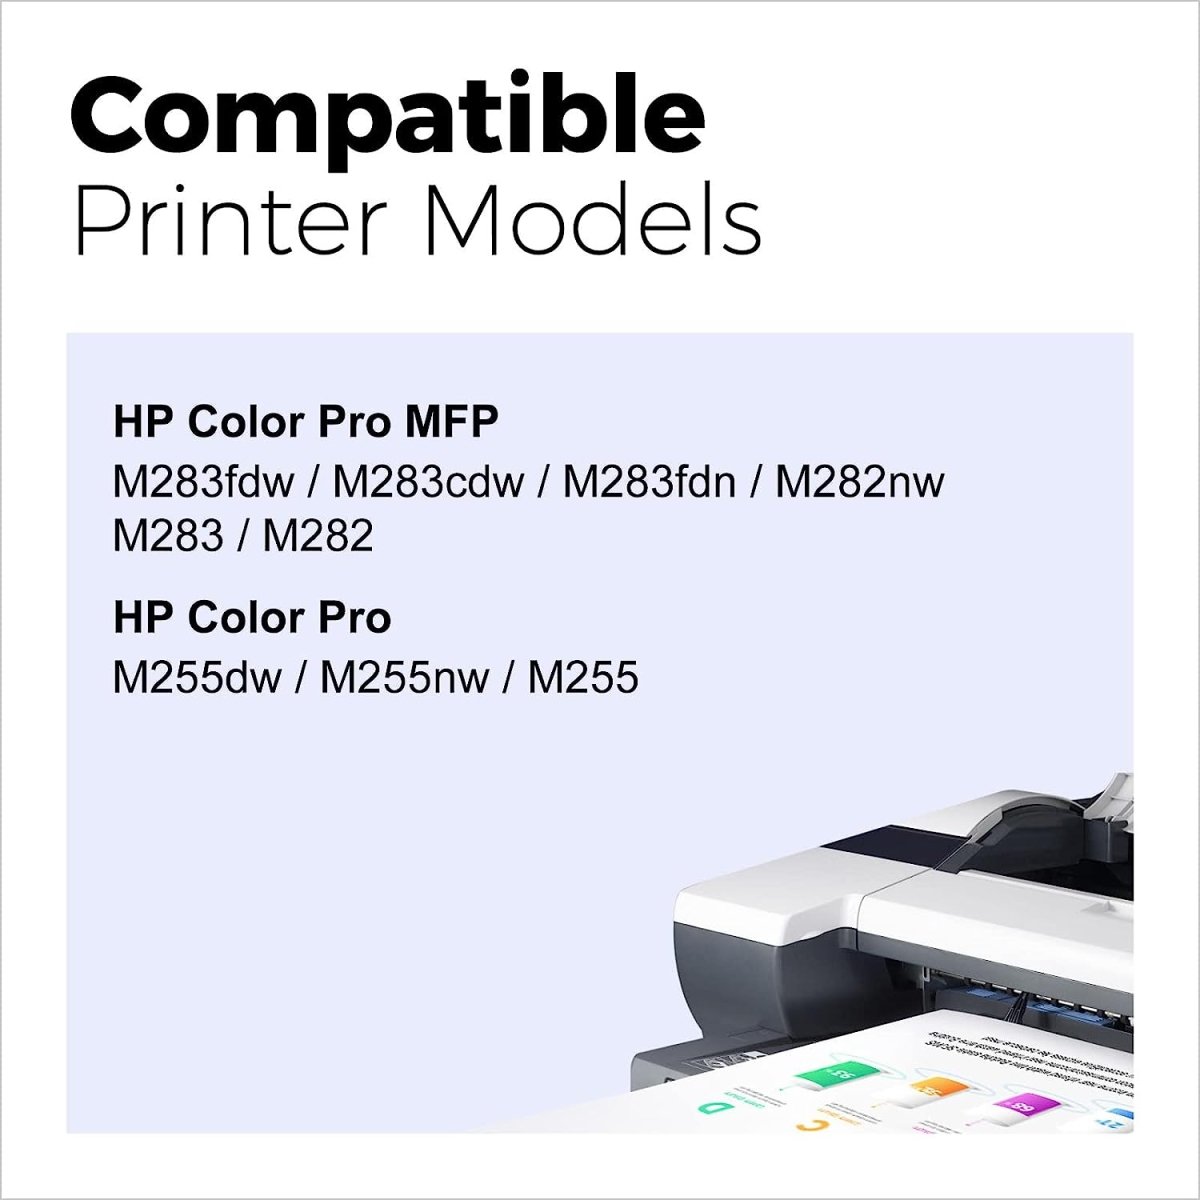 206X Toner Cartridges 4 Pack High Yield (with Chip) Compatible HP 206A myCartridge - Linford Office:Printer Ink & Toner Cartridge